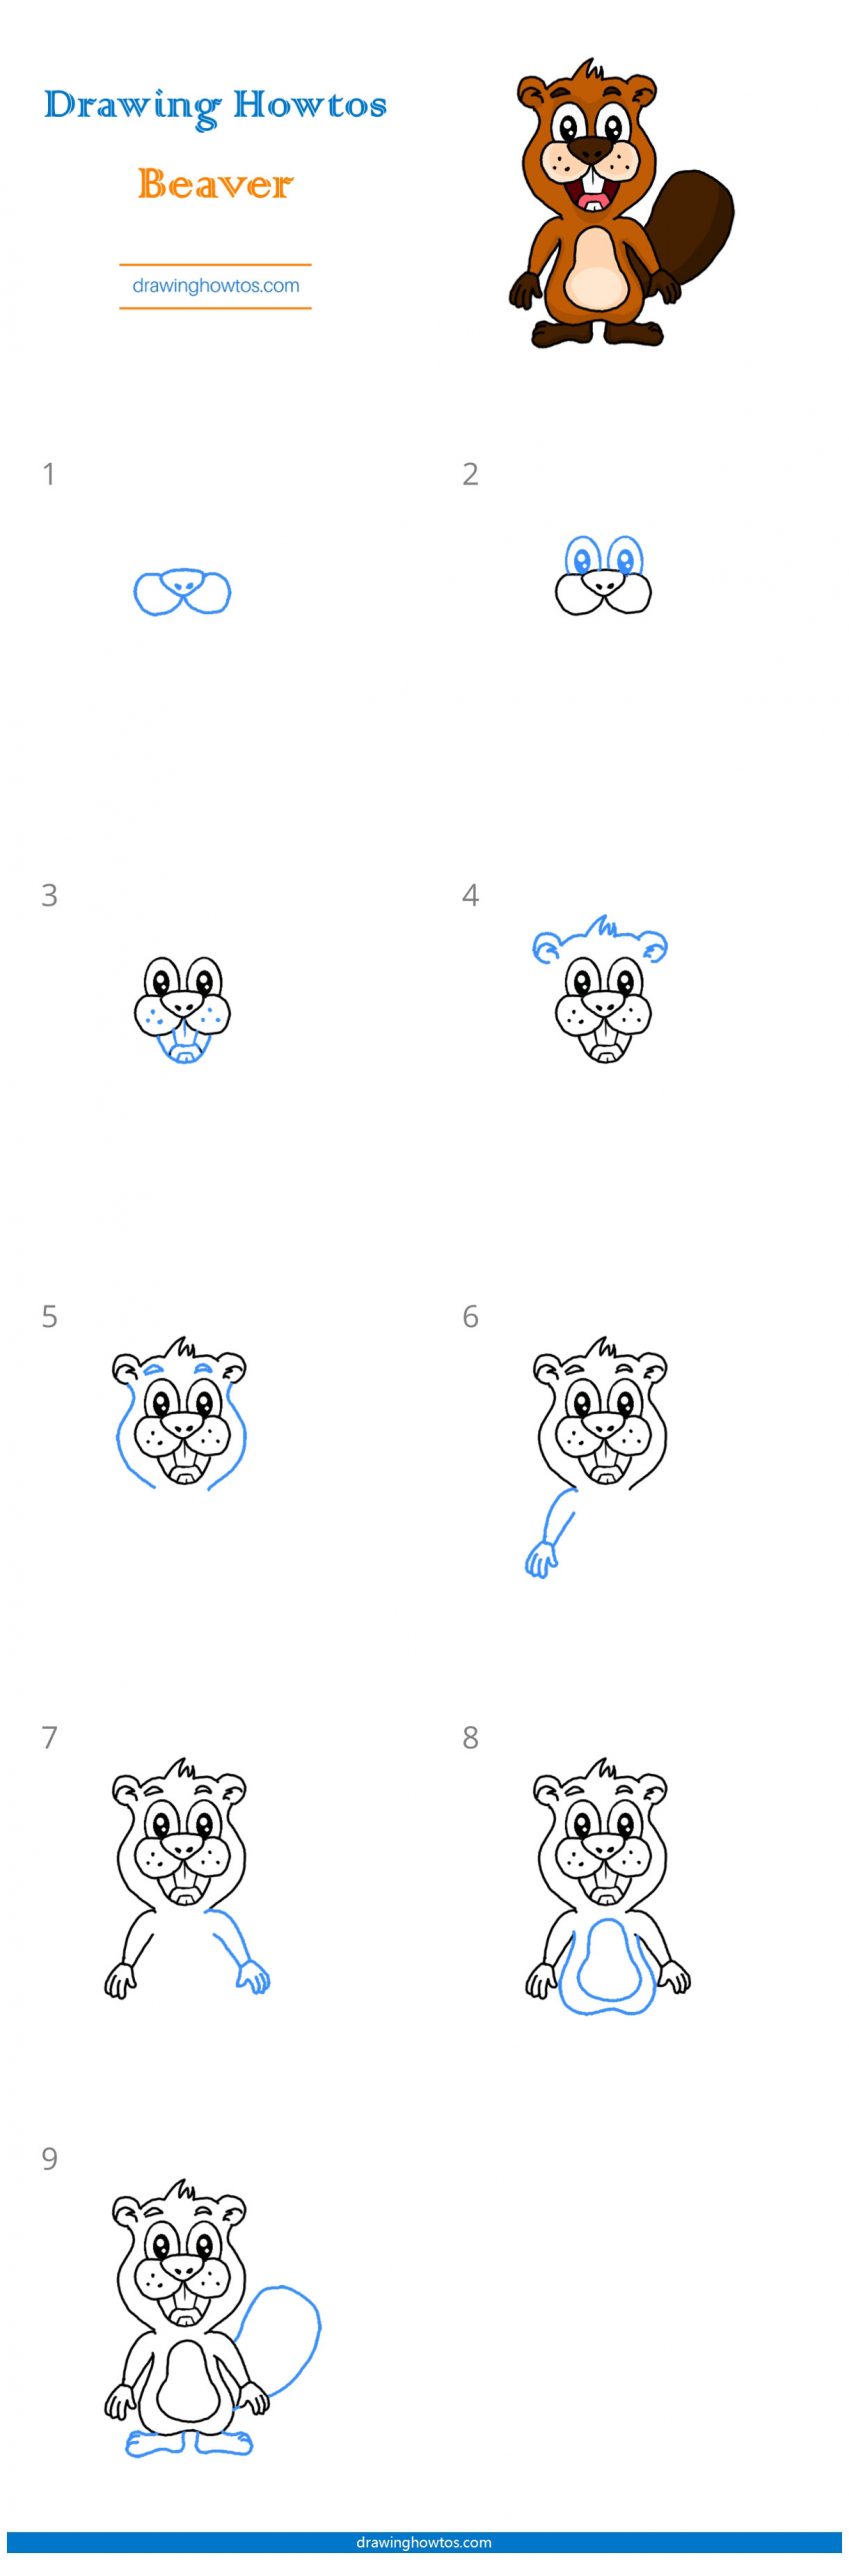 How to Draw a Beaver Step by Step